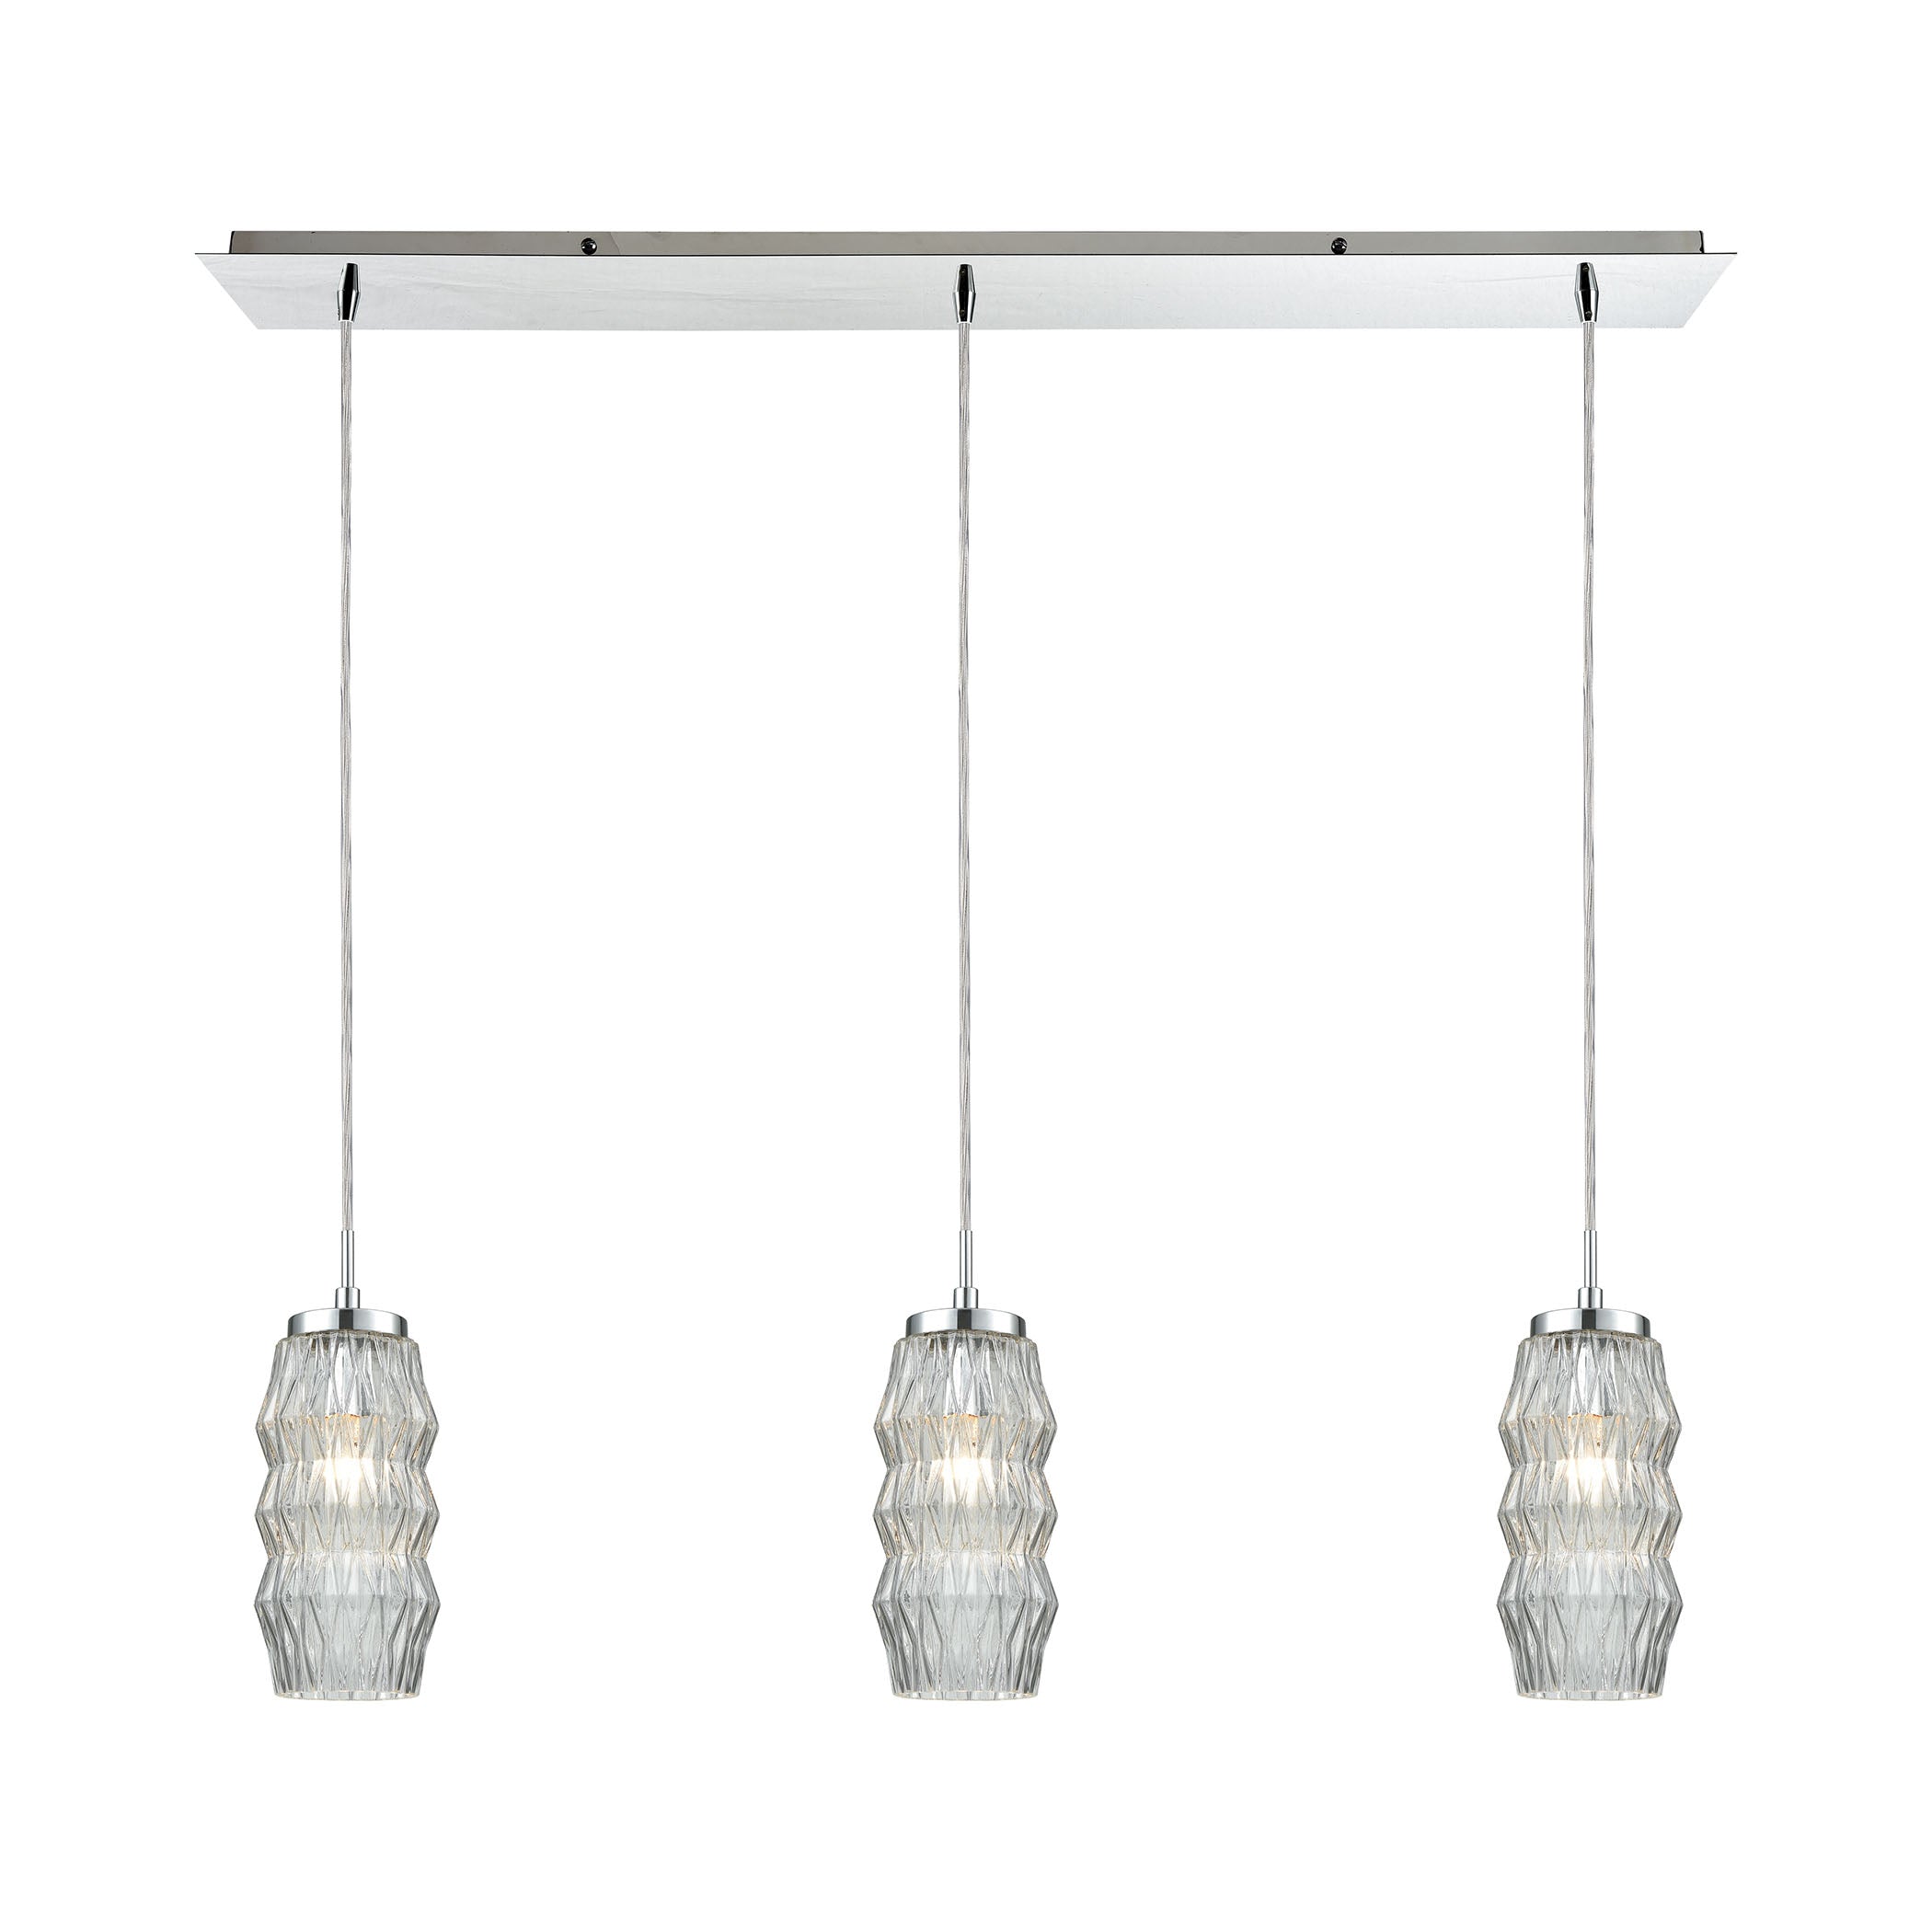 ELK Lighting 56650/3LP Zigzag 3-Light Linear Mini Pendant Fixture in Polished Chrome with Clear Patterned Glass